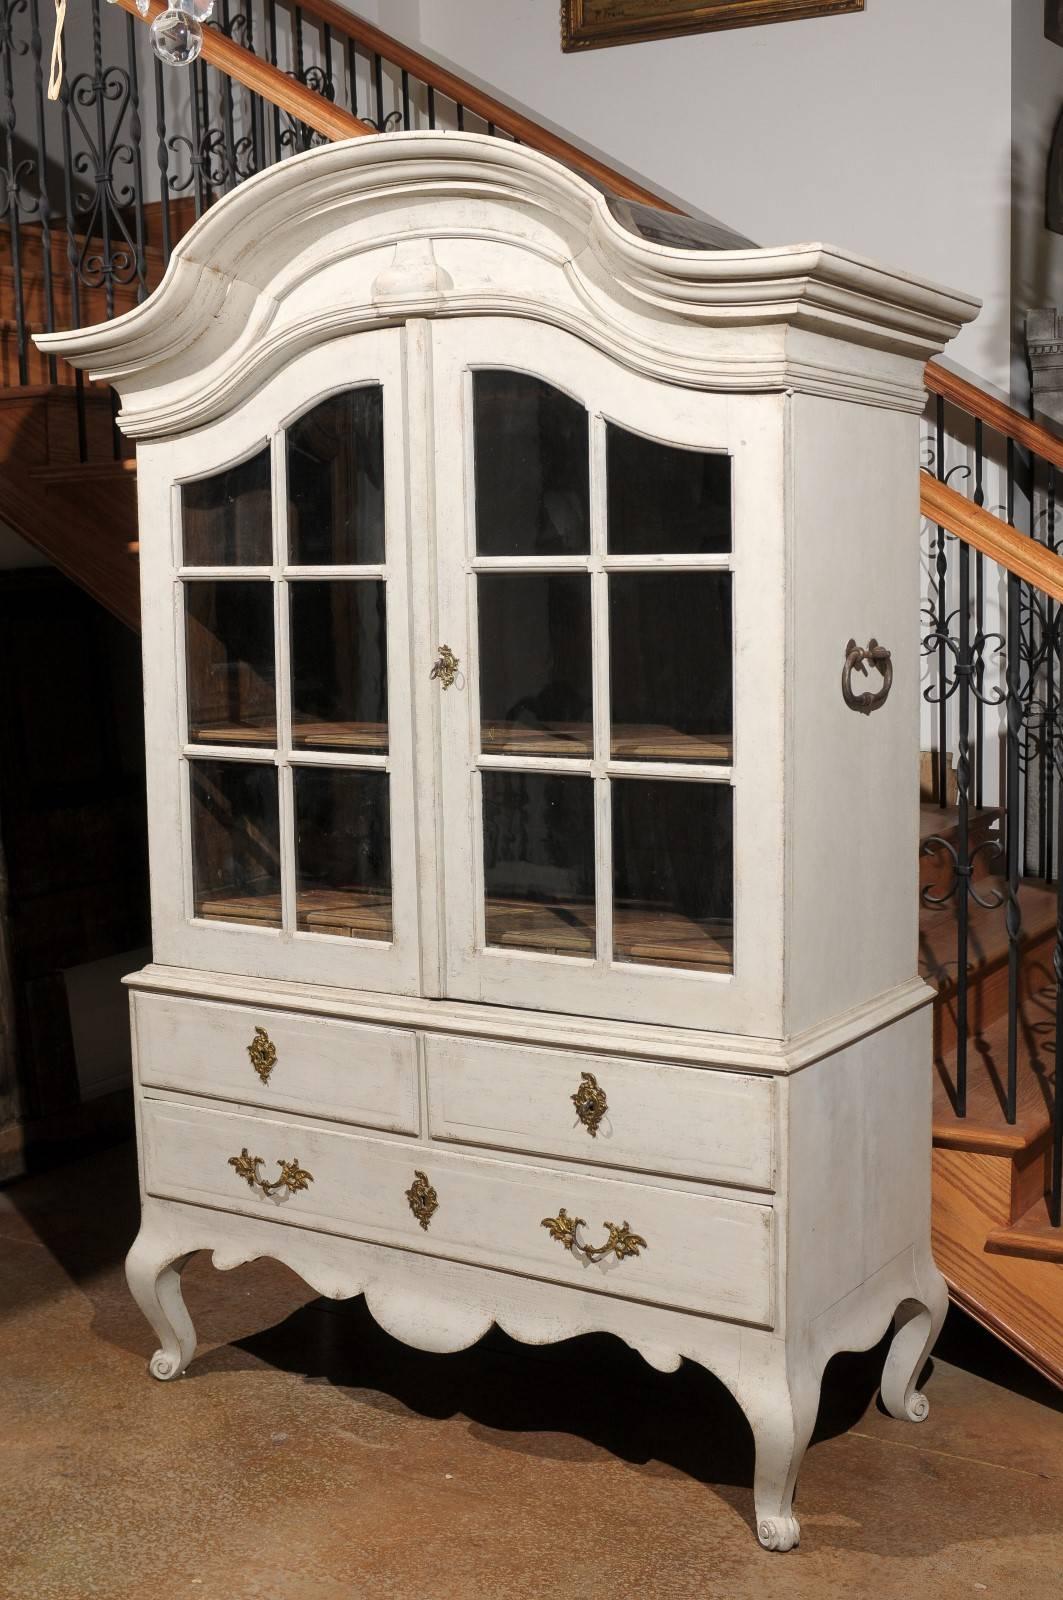 1760s Period Rococo Swedish Cabinet with Glass Doors, Bonnet Top and Cabrioles For Sale 5